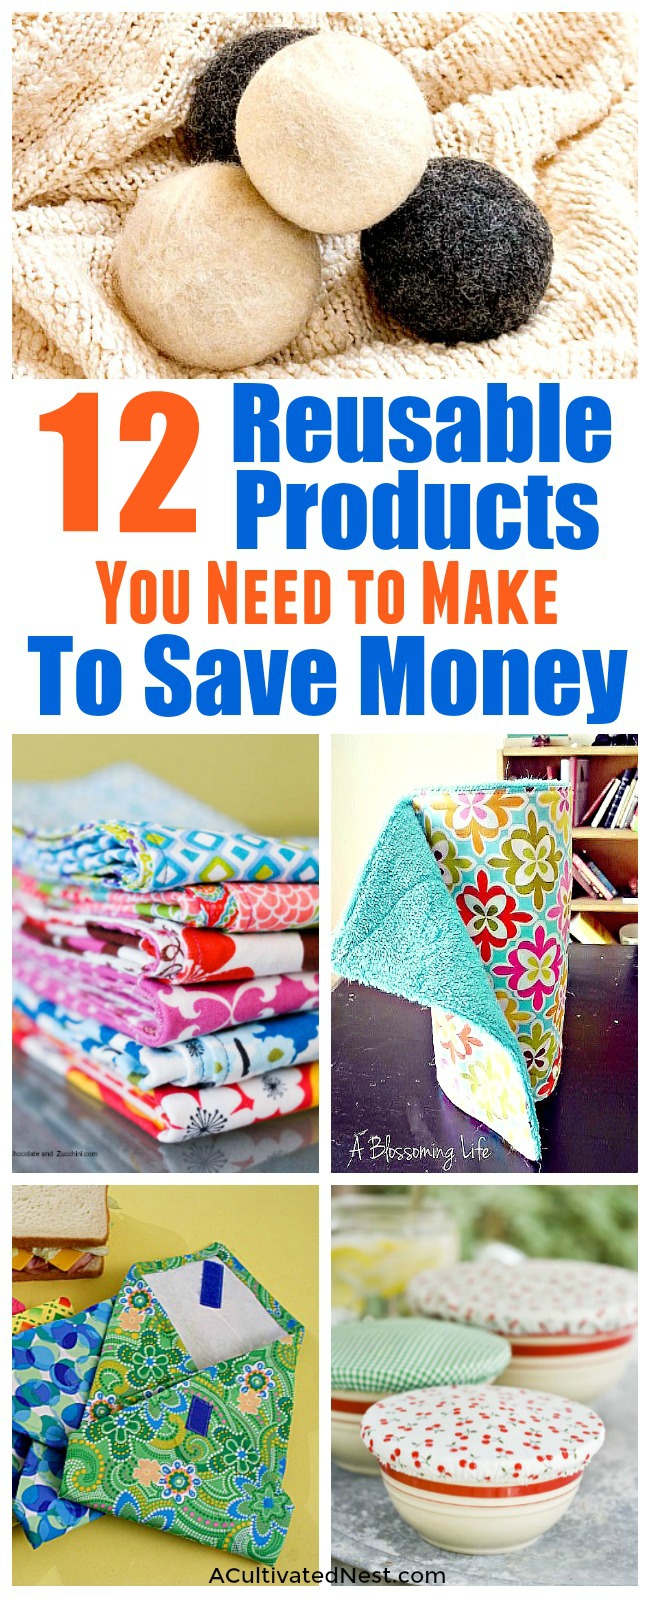 Disposable Products You Can Replace with Reusable Ones- You can save money and help the environment at the same time by making these DIY reusable products! They're so easy to make, and you can use your favorite colors! | eco friendly, frugal, ways to save money, wool dryer balls, cloth paper towels, unpaper towels, #diy #saveMoney #ACultivatedNest